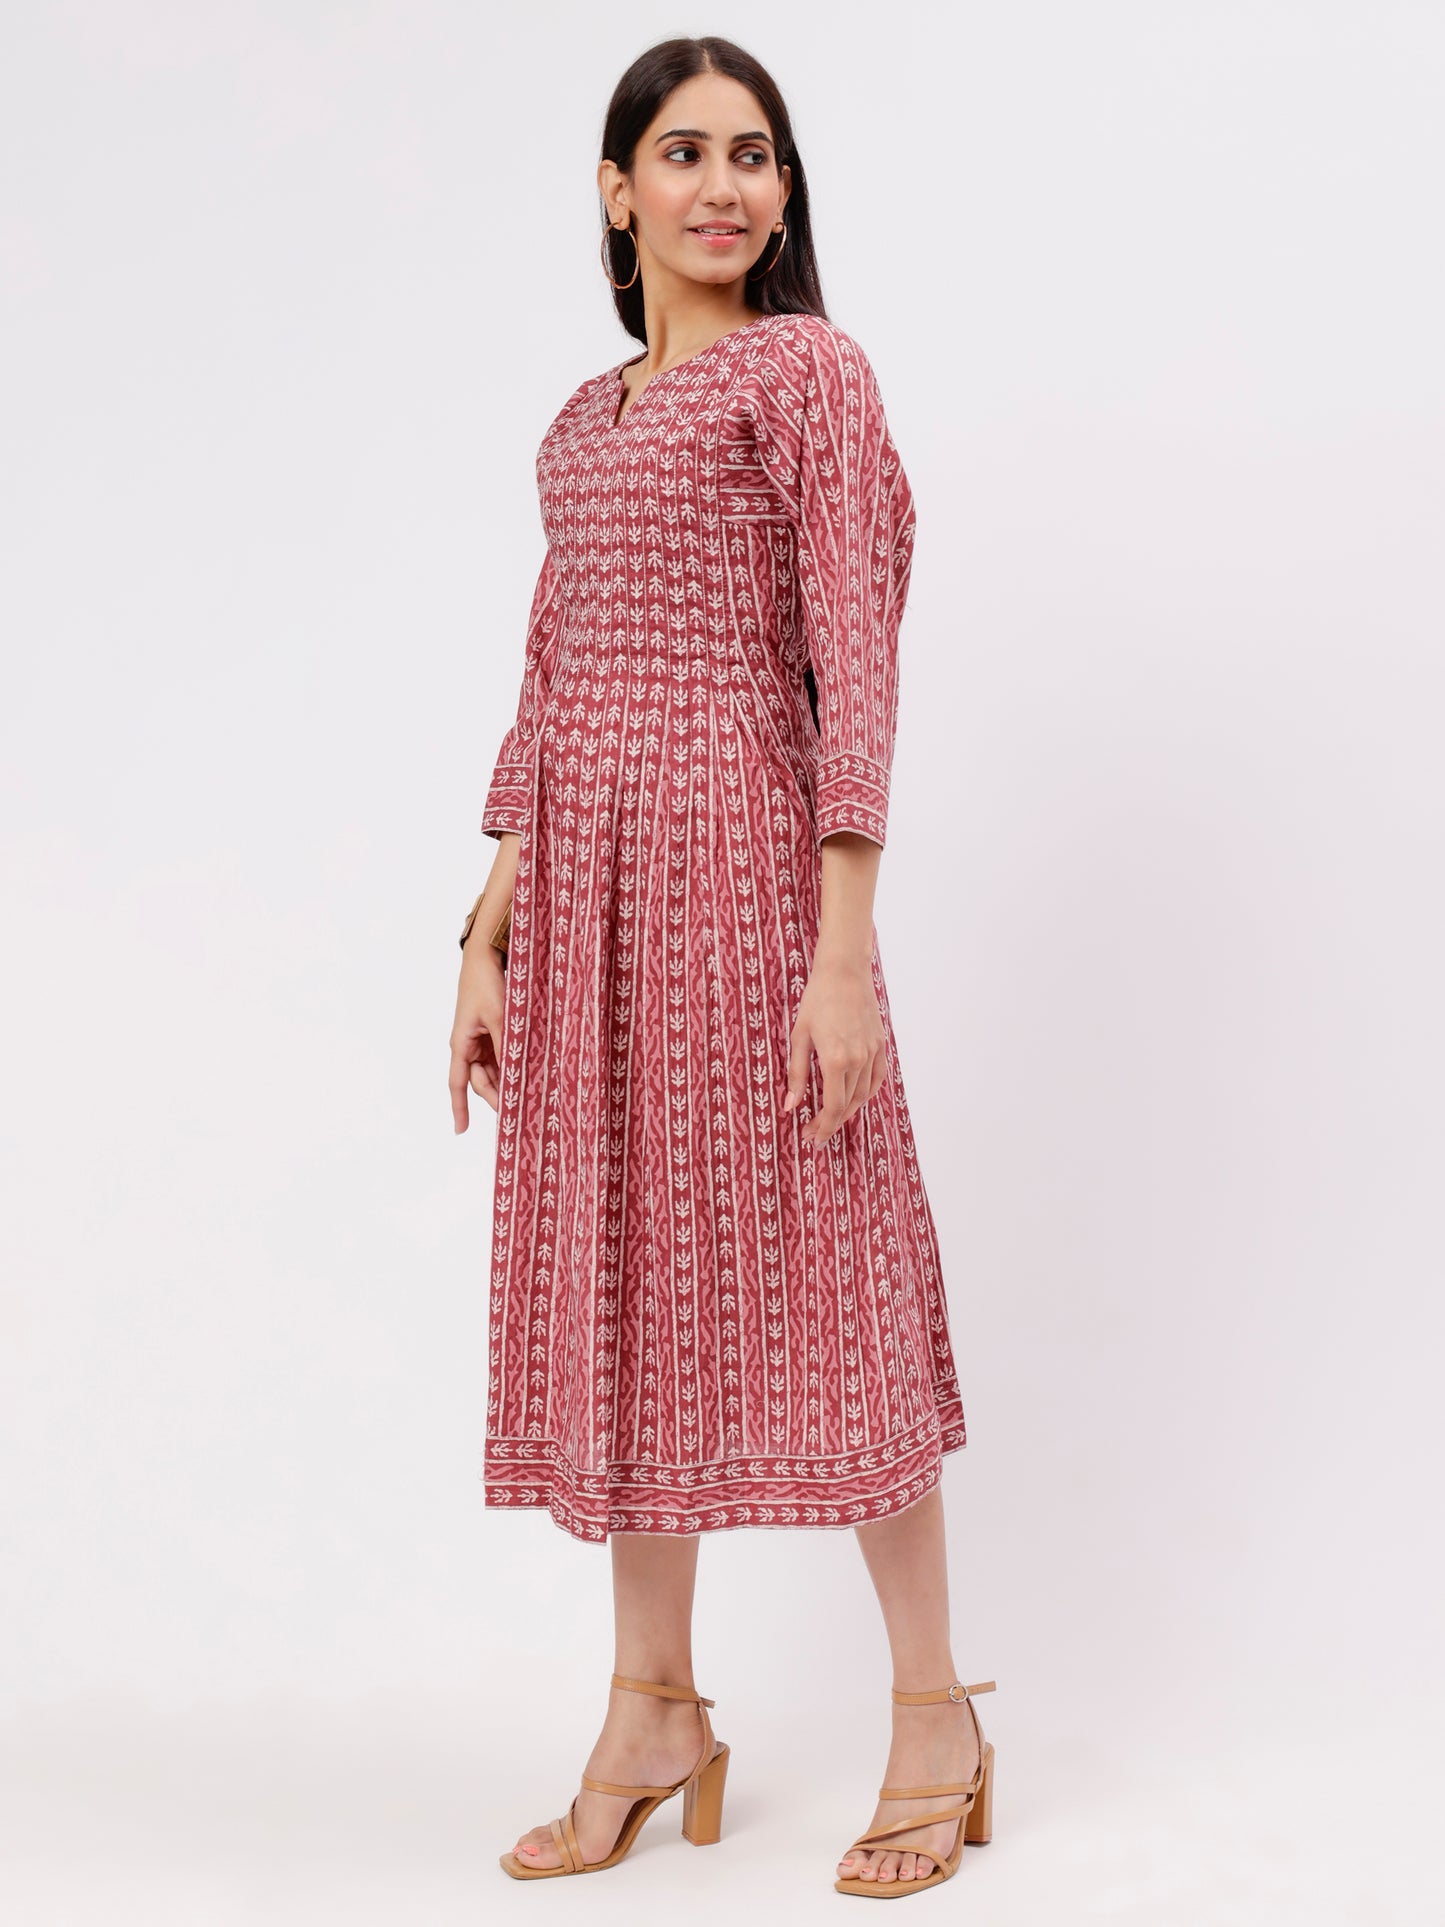 Chestnut Colored Printed Calf Length Pleated Dress in Soft cotton